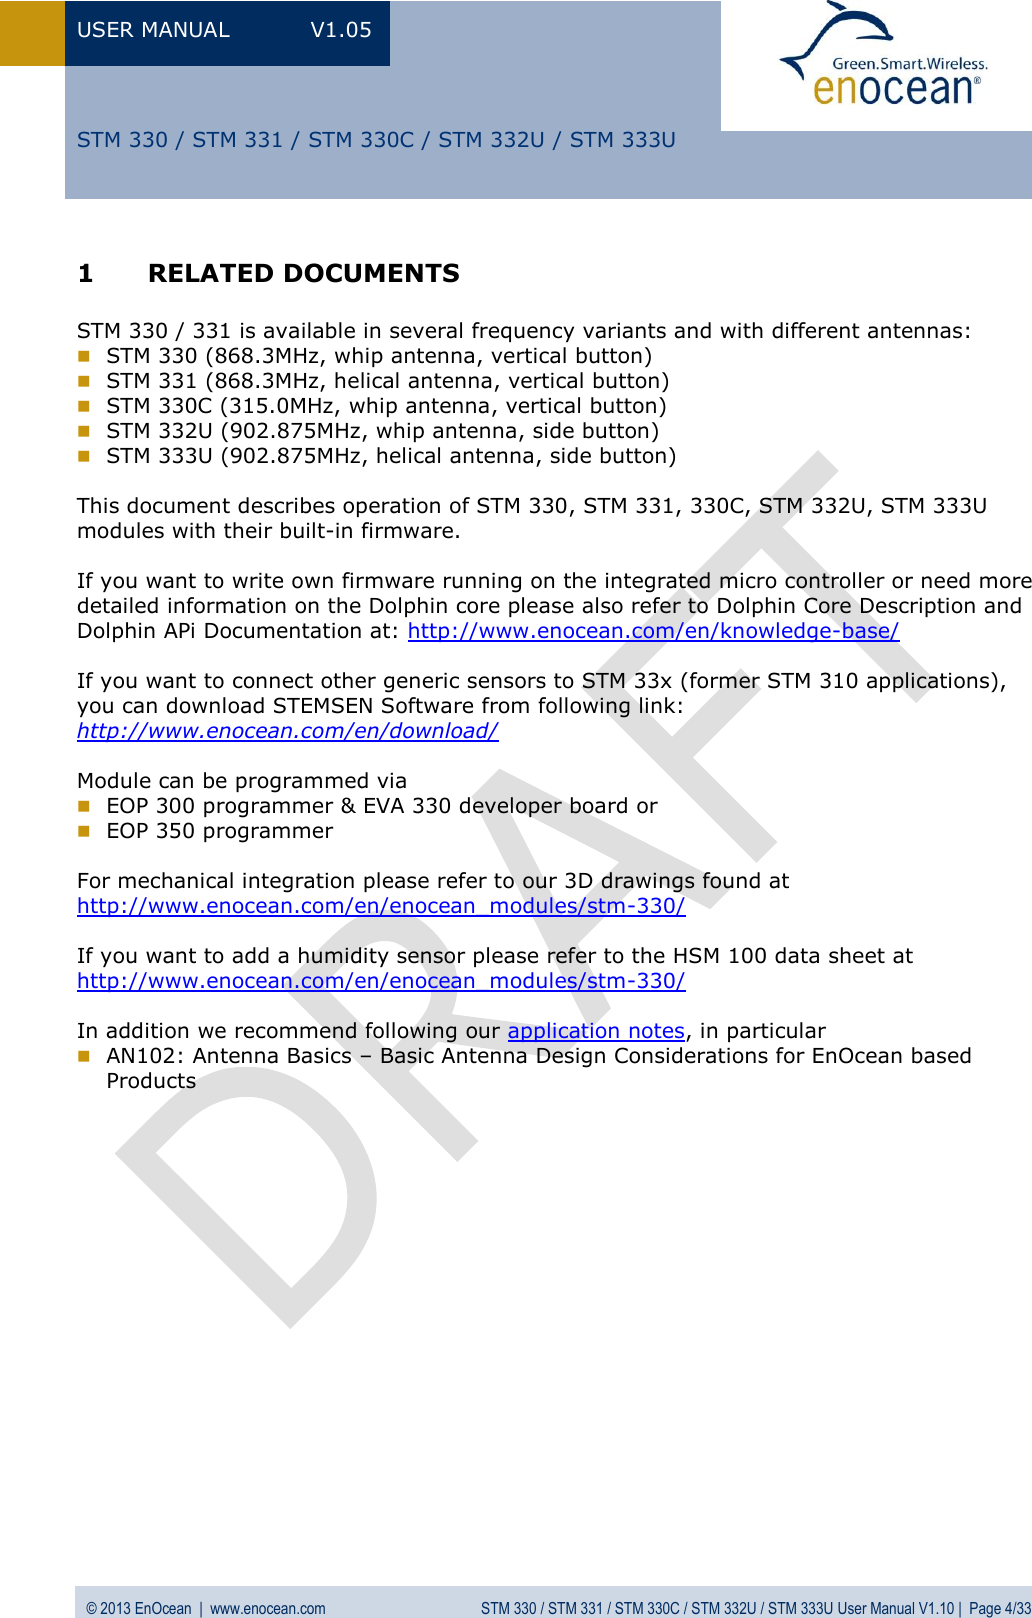 USER MANUAL  V1.05  © 2013 EnOcean  |  www.enocean.com  STM 330 / STM 331 / STM 330C / STM 332U / STM 333U User Manual V1.10 |  Page 4/33   STM 330 / STM 331 / STM 330C / STM 332U / STM 333U 1 RELATED DOCUMENTS  STM 330 / 331 is available in several frequency variants and with different antennas:  STM 330 (868.3MHz, whip antenna, vertical button)  STM 331 (868.3MHz, helical antenna, vertical button)  STM 330C (315.0MHz, whip antenna, vertical button)  STM 332U (902.875MHz, whip antenna, side button)  STM 333U (902.875MHz, helical antenna, side button)  This document describes operation of STM 330, STM 331, 330C, STM 332U, STM 333U modules with their built-in firmware.   If you want to write own firmware running on the integrated micro controller or need more detailed information on the Dolphin core please also refer to Dolphin Core Description and Dolphin APi Documentation at: http://www.enocean.com/en/knowledge-base/   If you want to connect other generic sensors to STM 33x (former STM 310 applications), you can download STEMSEN Software from following link: http://www.enocean.com/en/download/   Module can be programmed via   EOP 300 programmer &amp; EVA 330 developer board or   EOP 350 programmer  For mechanical integration please refer to our 3D drawings found at http://www.enocean.com/en/enocean_modules/stm-330/  If you want to add a humidity sensor please refer to the HSM 100 data sheet at http://www.enocean.com/en/enocean_modules/stm-330/  In addition we recommend following our application notes, in particular  AN102: Antenna Basics – Basic Antenna Design Considerations for EnOcean based  Products 